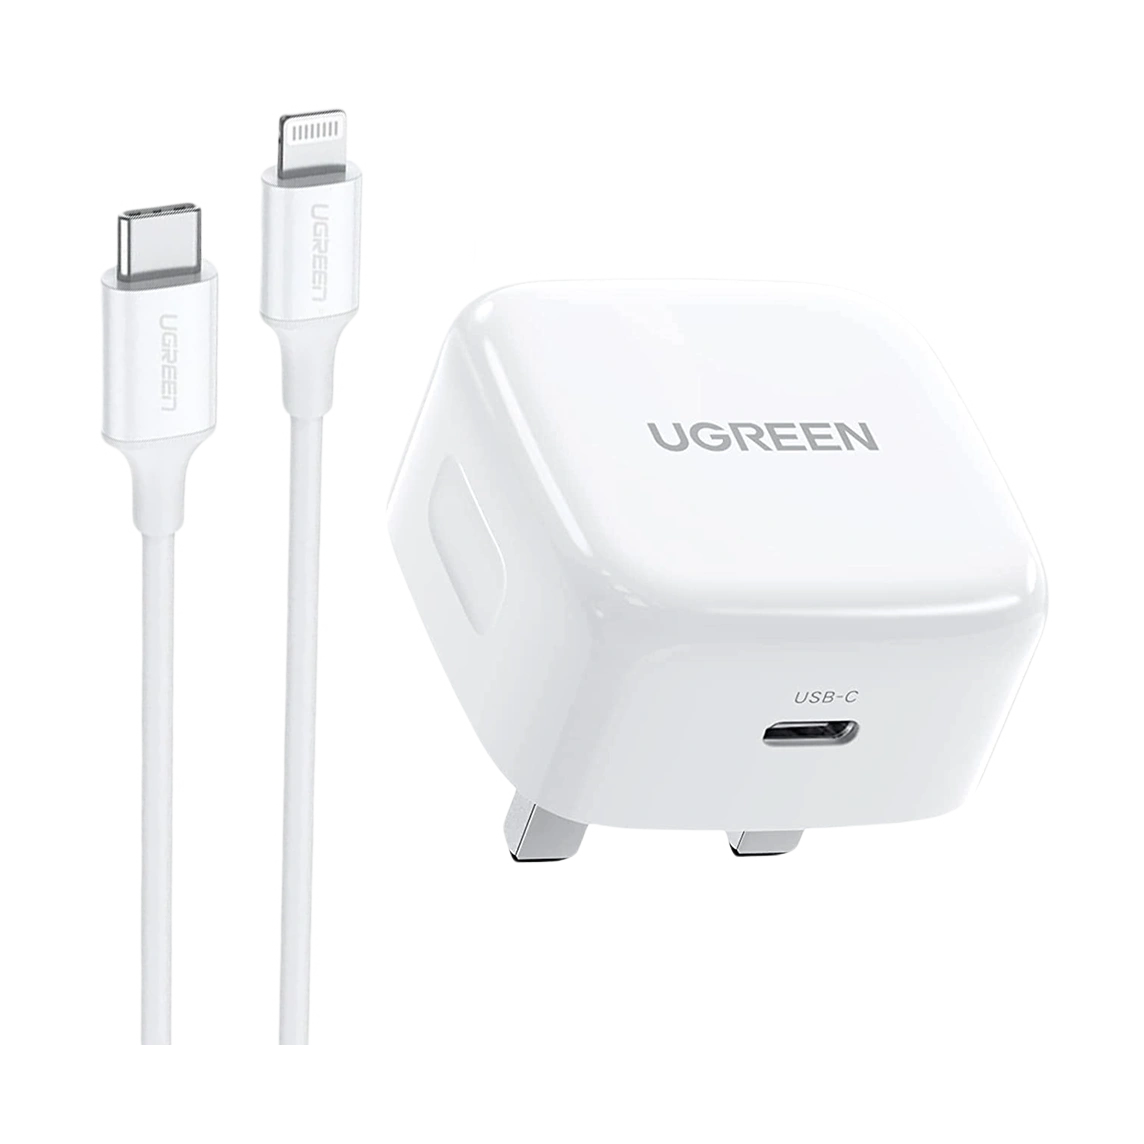 UGREEN USB-C PD Fast Charger UK USB-C to Lightning Cable 70297